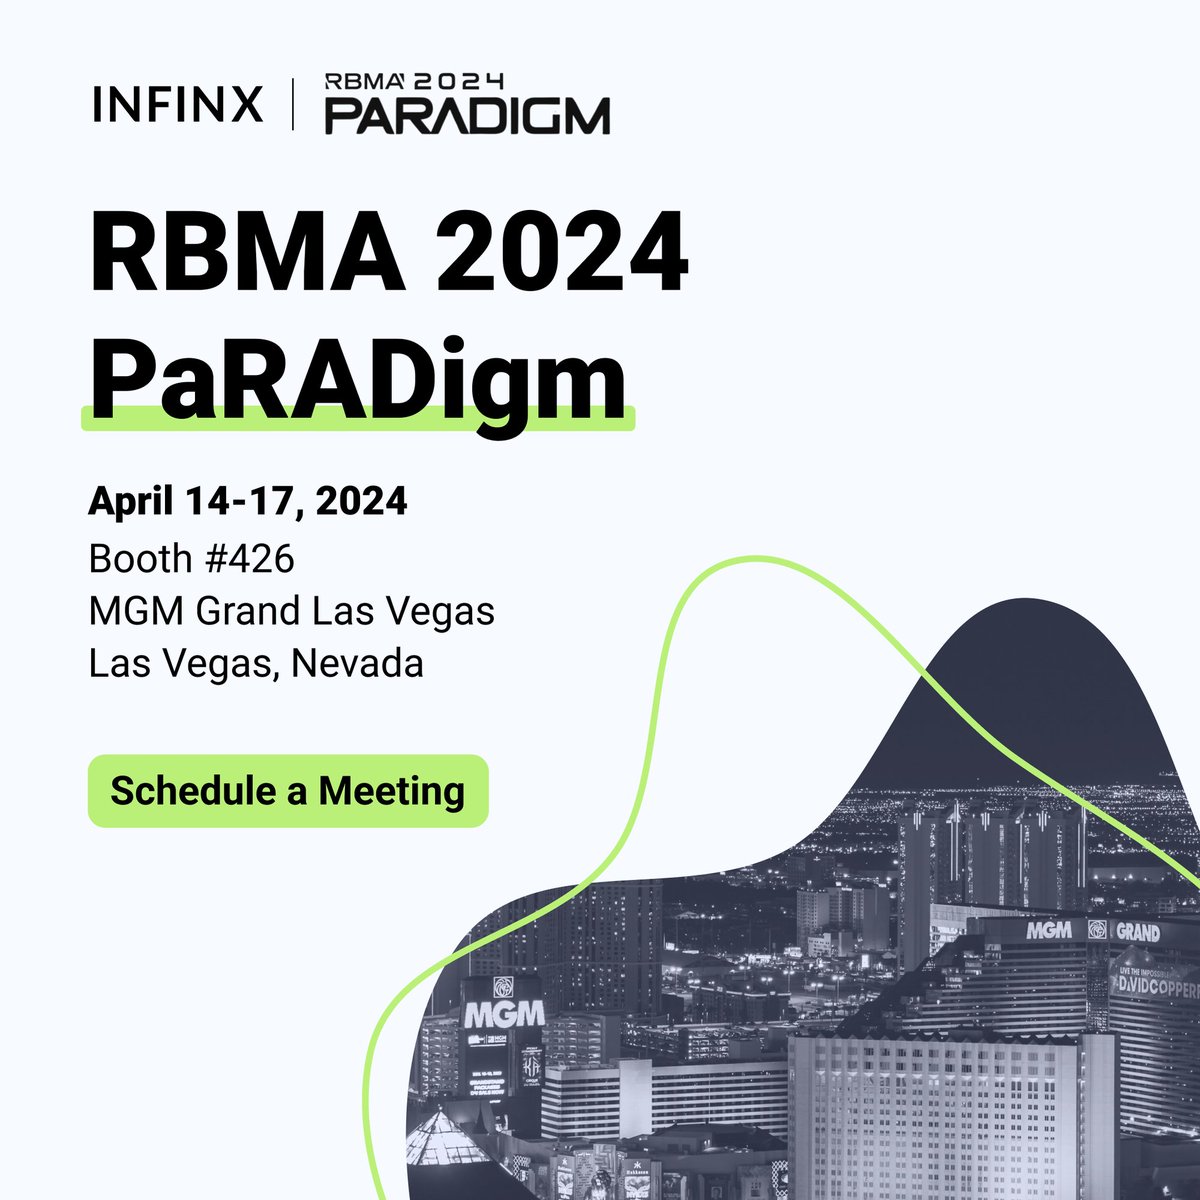 Our team will be in booth #426 April 14th-17th at RBMA’s Annual PaRADigm meeting in Las Vegas. We’re offering assessments of revenue shortfalls, A/R aging analyses and more. hubs.li/Q02rmPSM0 #RBMA #RBMAPaRADigm24 #RCM #RCMAutomation #Radiology #PriorAuthorization